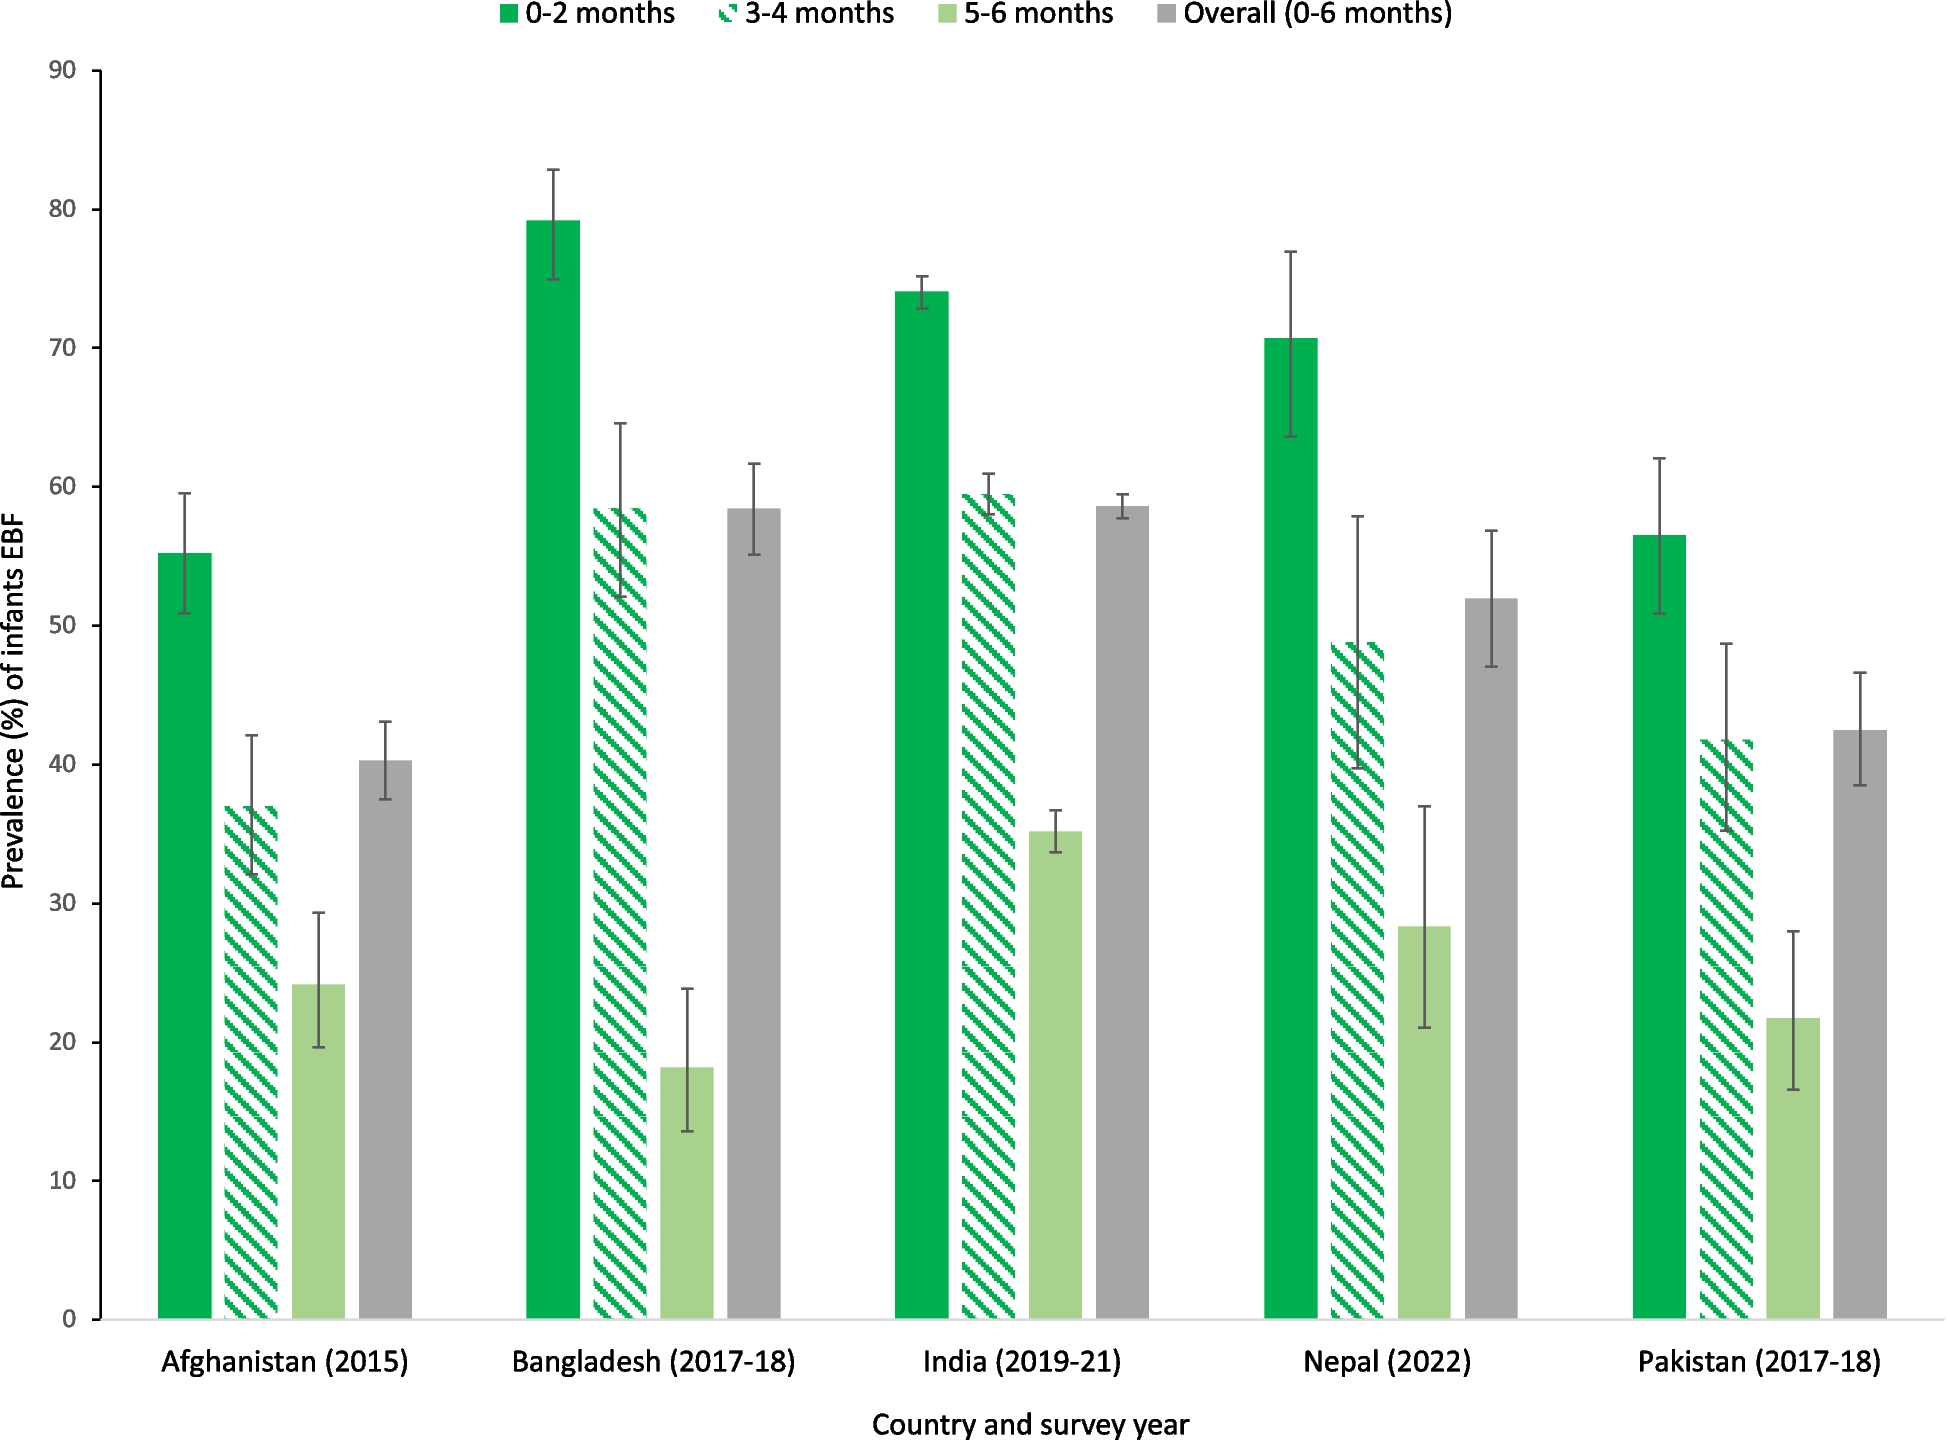 Effect of exclusive breastfeeding and other infant and young child feeding practices on childhood morbidity outcomes: associations for infants 0–6 months in 5 South Asian countries using Demographic and Health Survey data